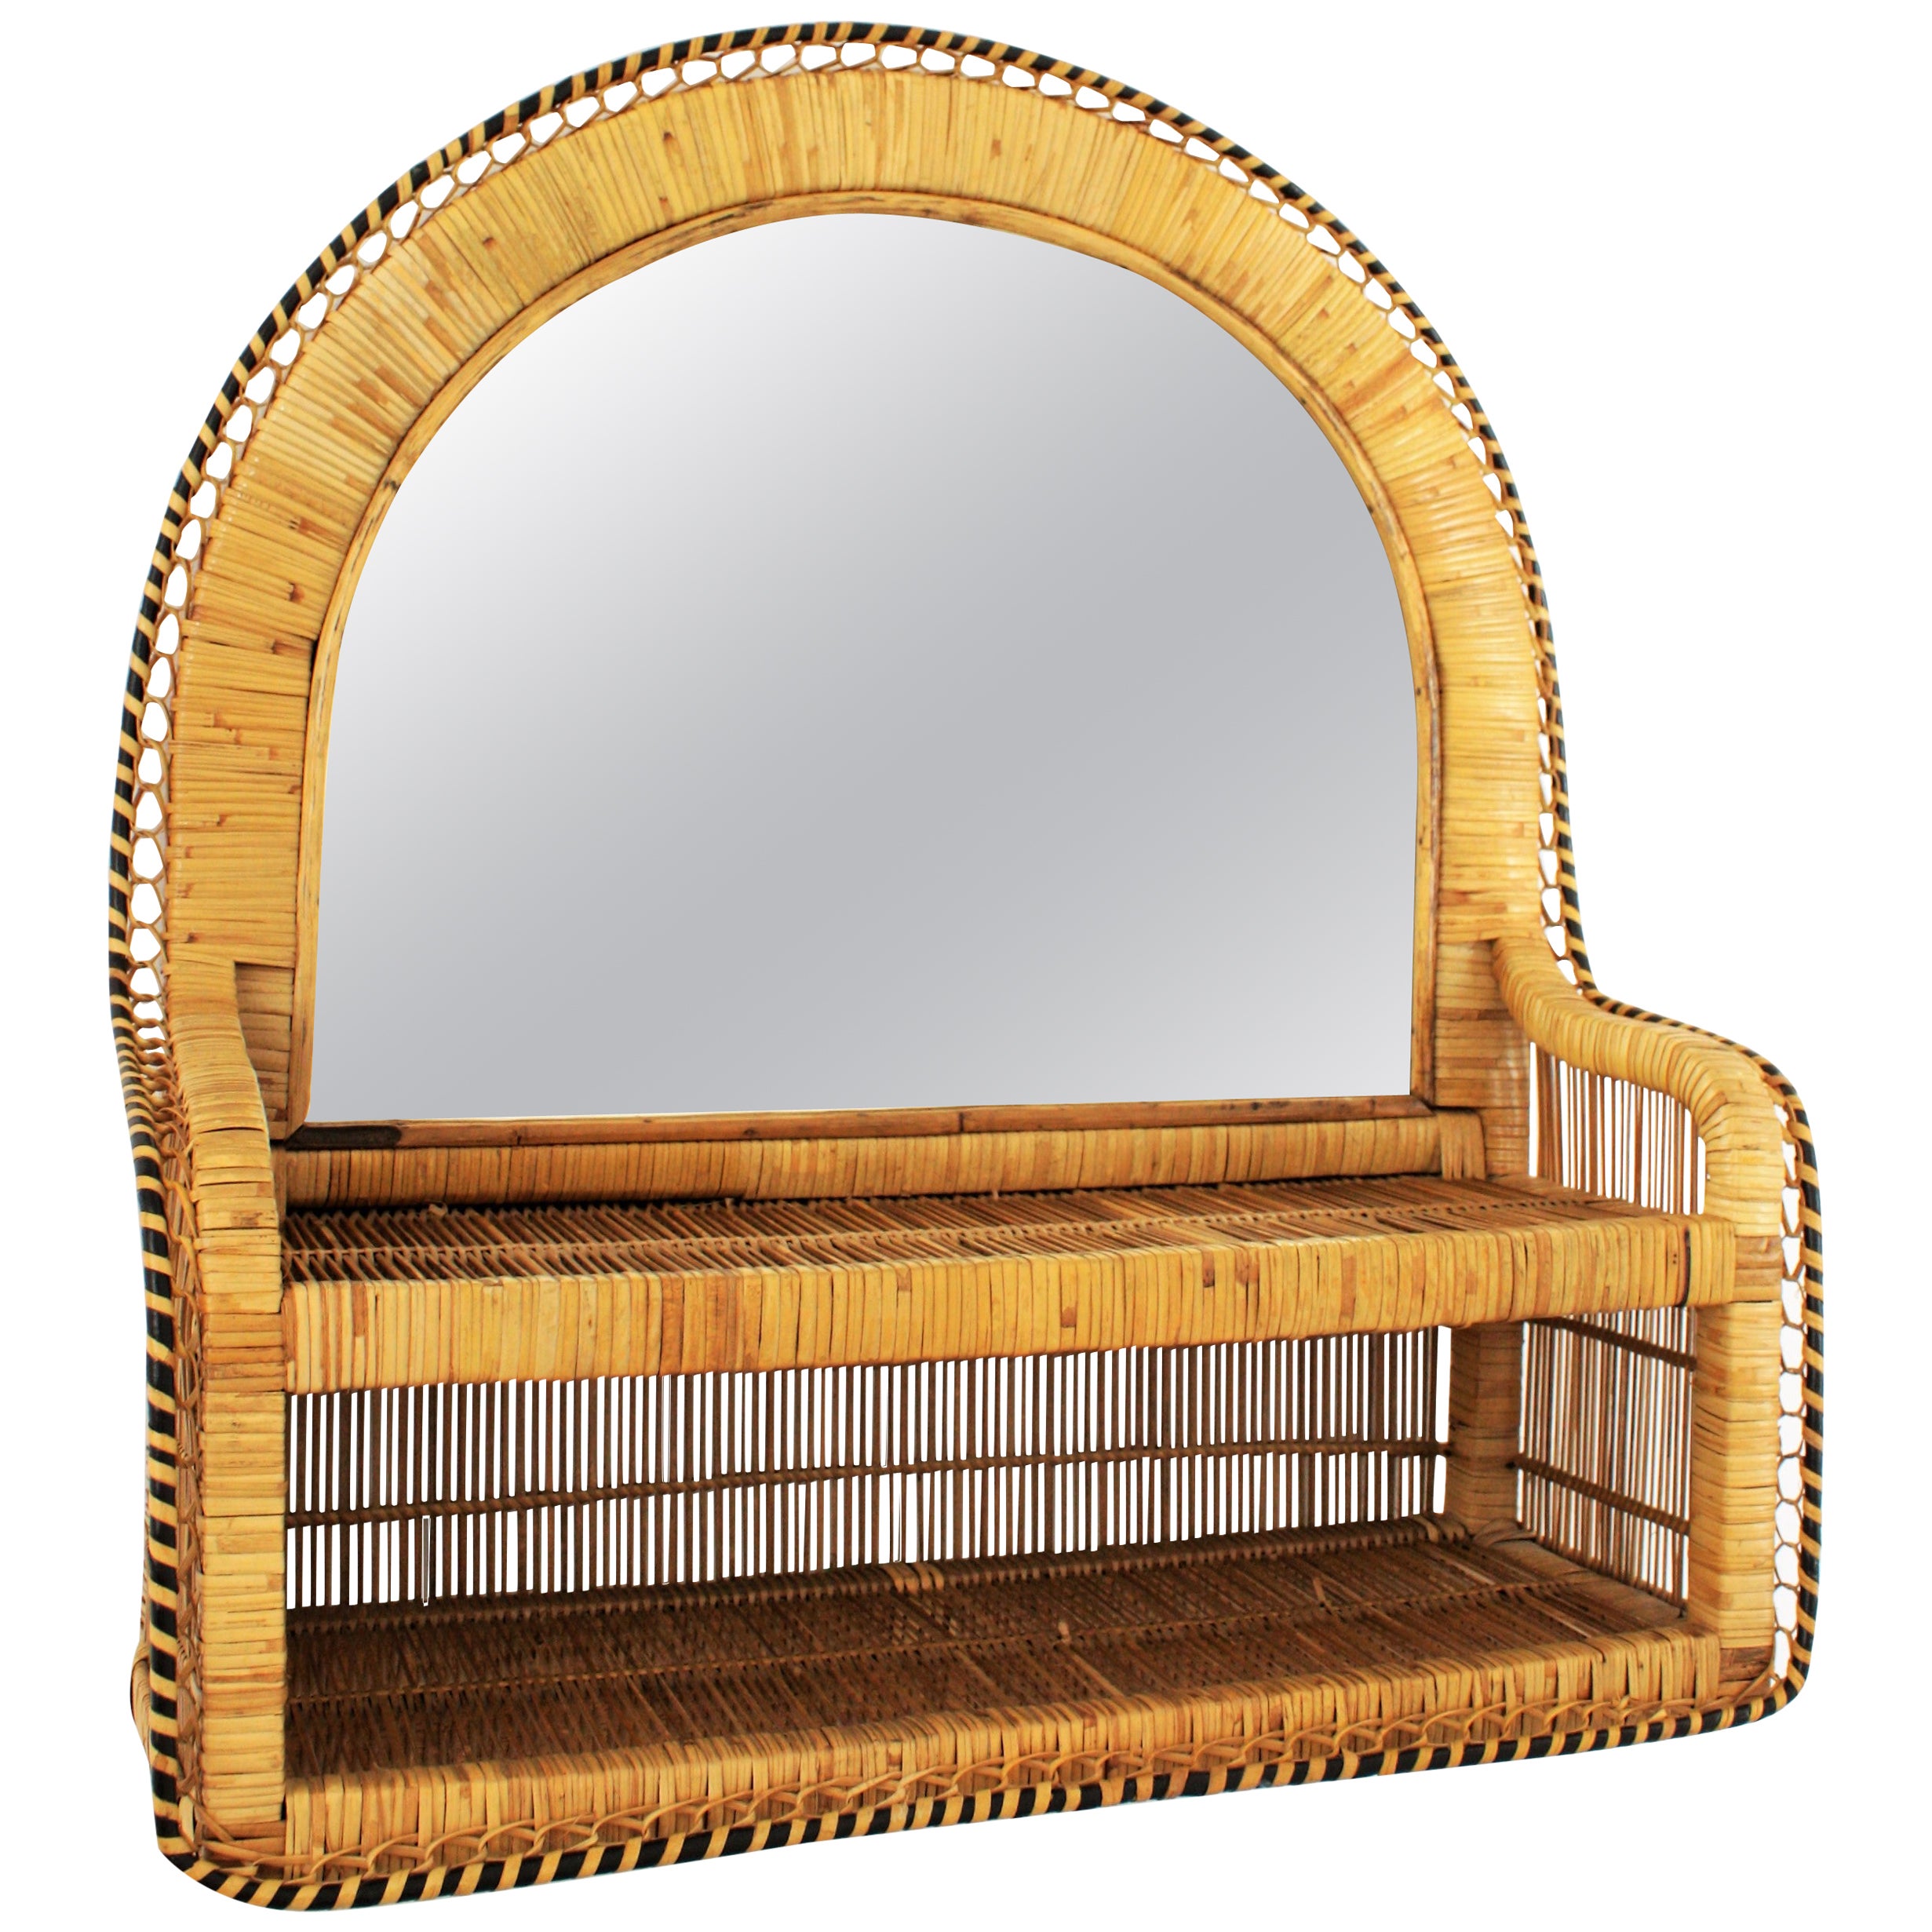 Rattan Woven Wicker Wall Mirror with Shelf, 1970s For Sale